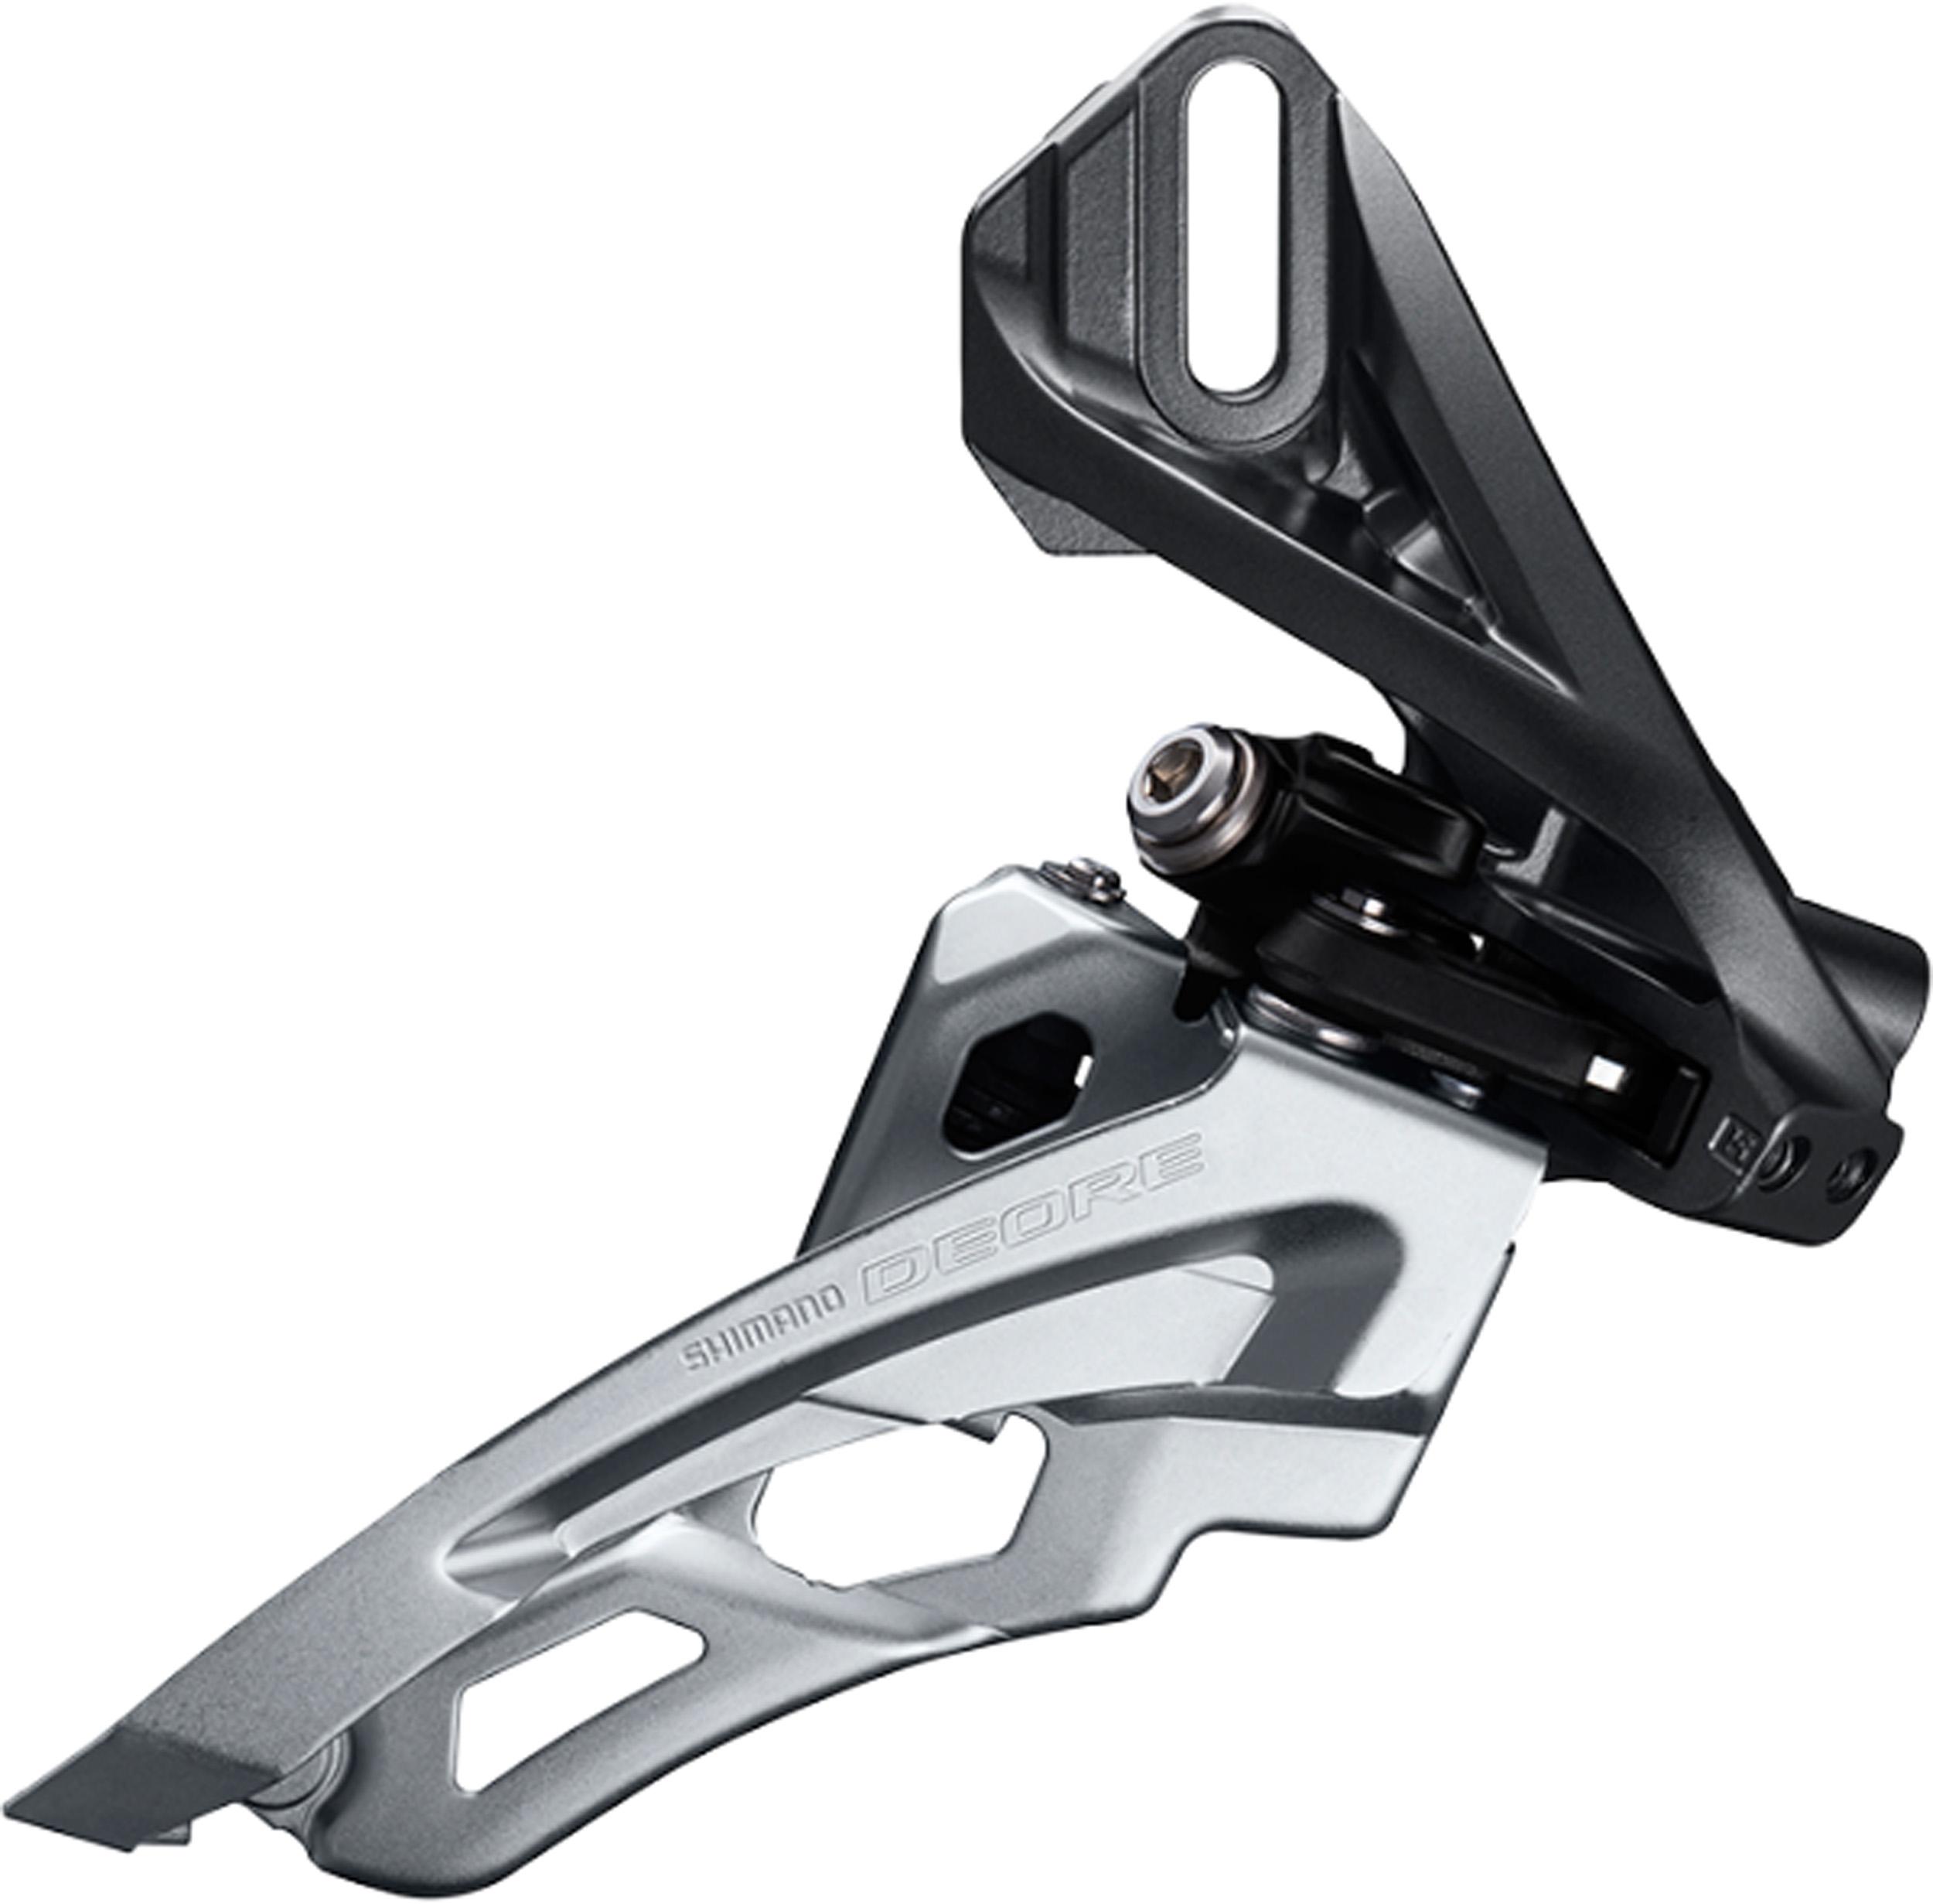 Shimano Deore M6000 Direct Mount 3x10 Front Mech - Black/silver